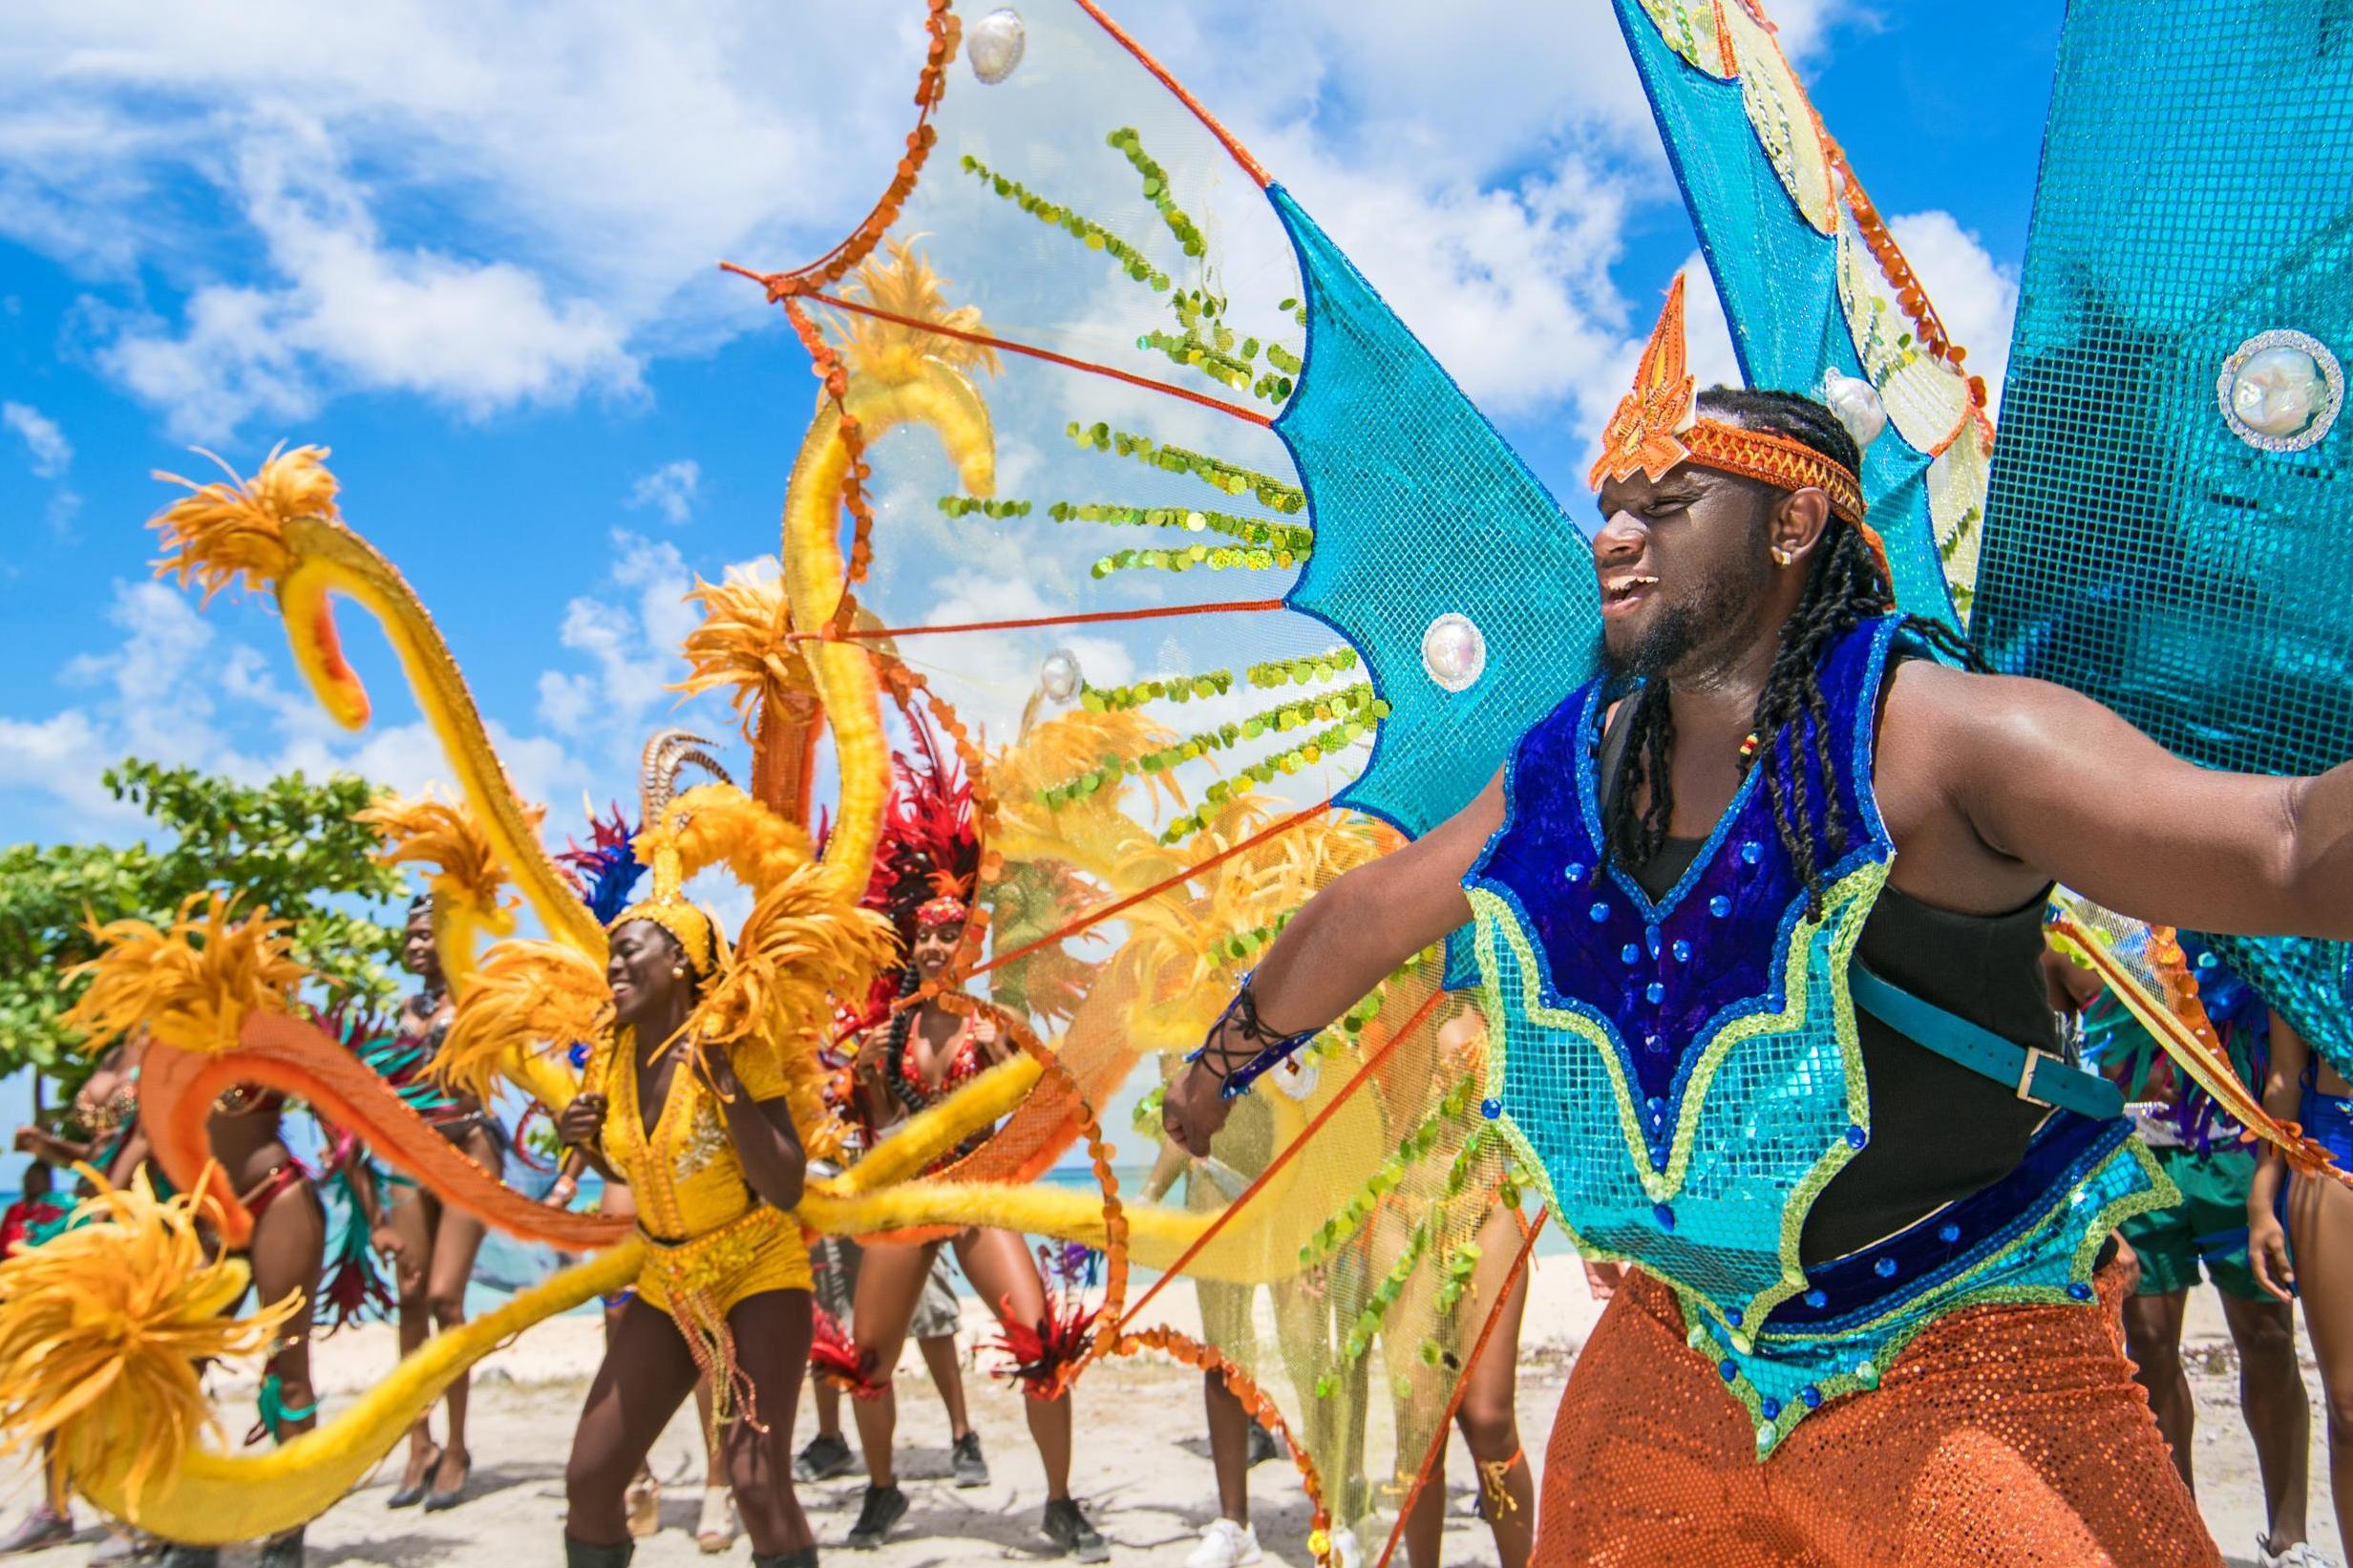 SPONSORED Discover fabulous food, culture and adventure in Barbados